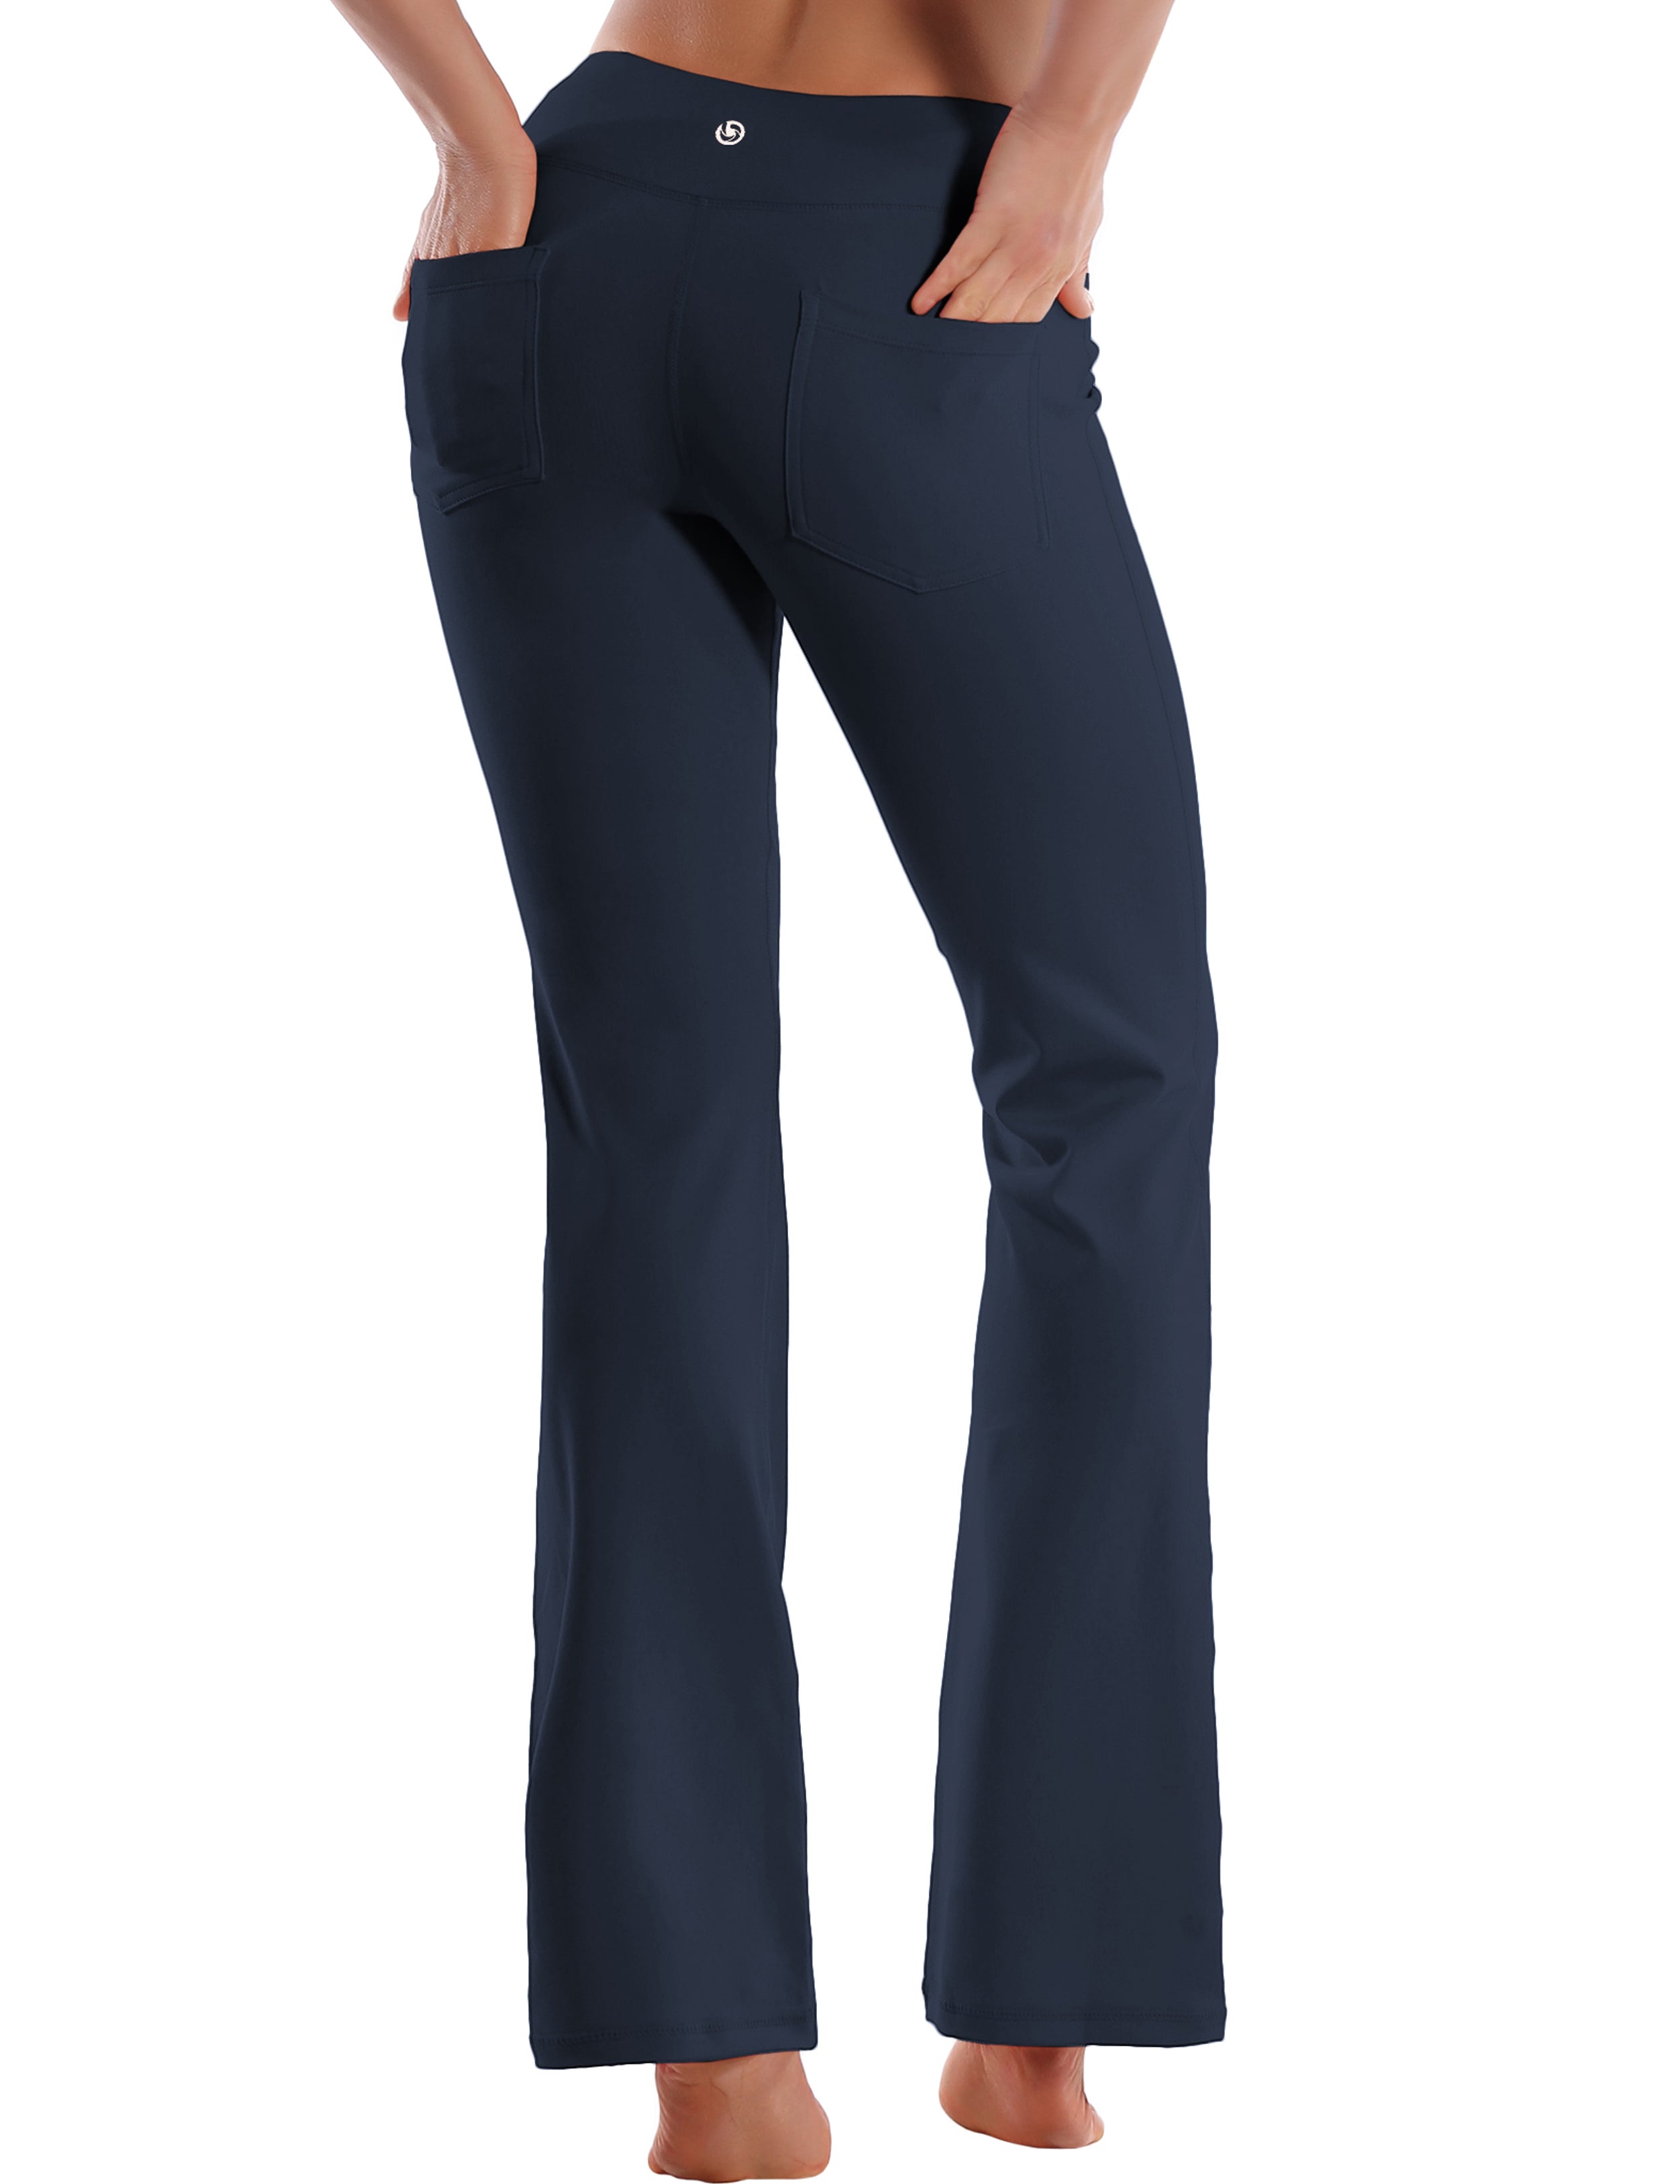 Back Pockets Bootcut Leggings darknavy 87%Nylon/13%Spandex Fabric doesn't attract lint easily 4-way stretch No see-through Moisture-wicking Inner pocket Four lengths